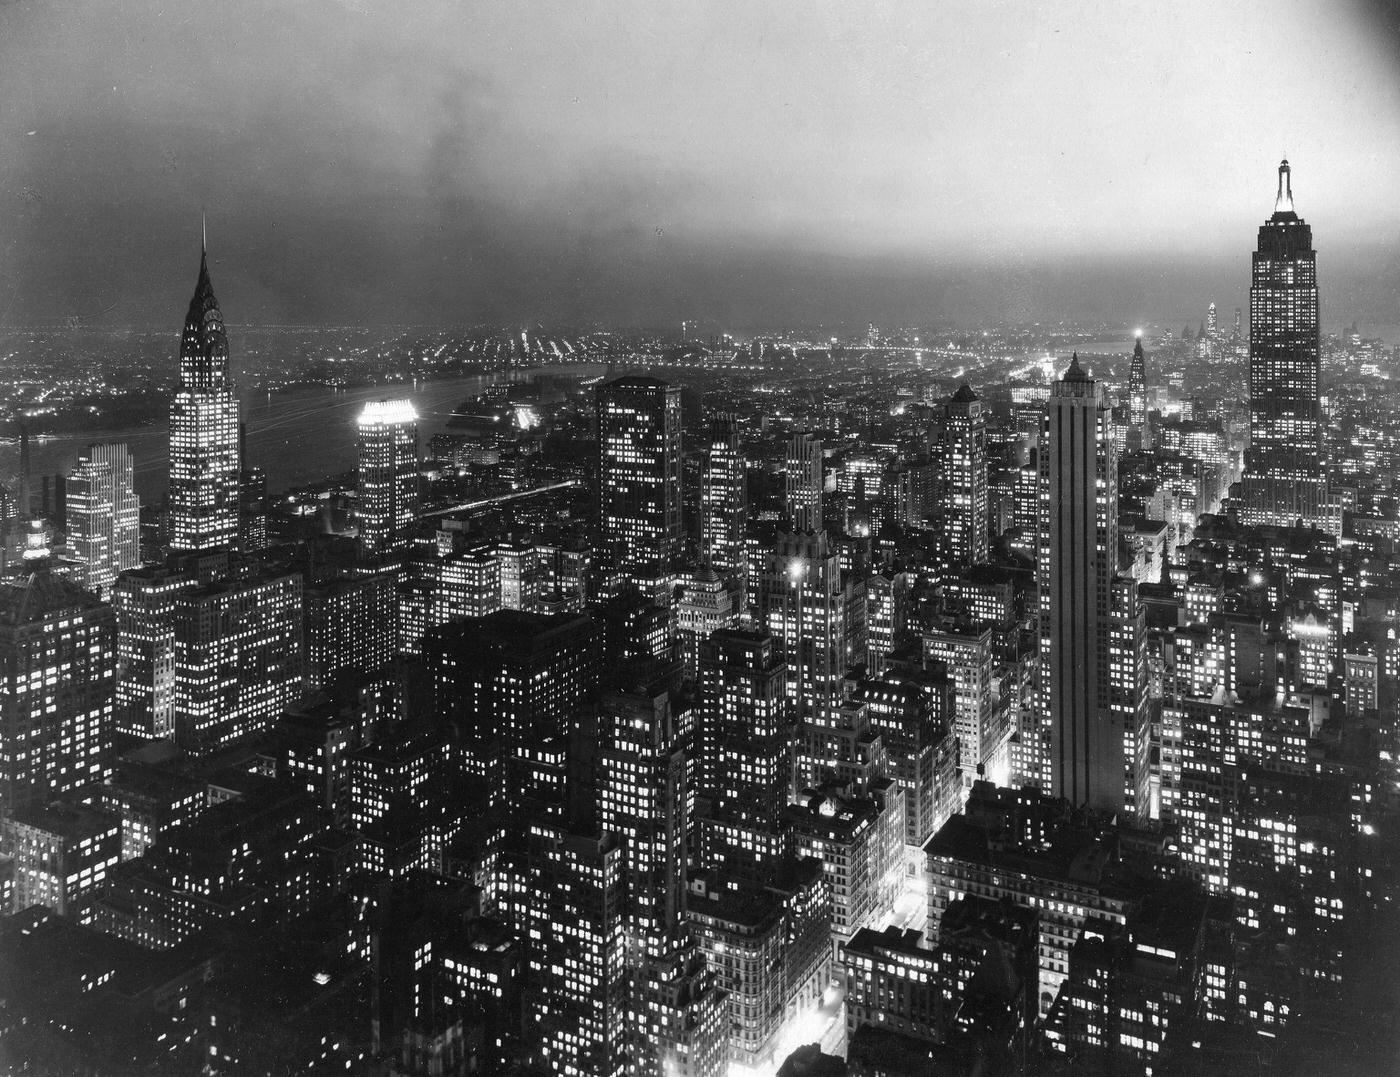 New York At Night With Empire State Building At Right And Chrysler Building At Left, Manhattan, 1950